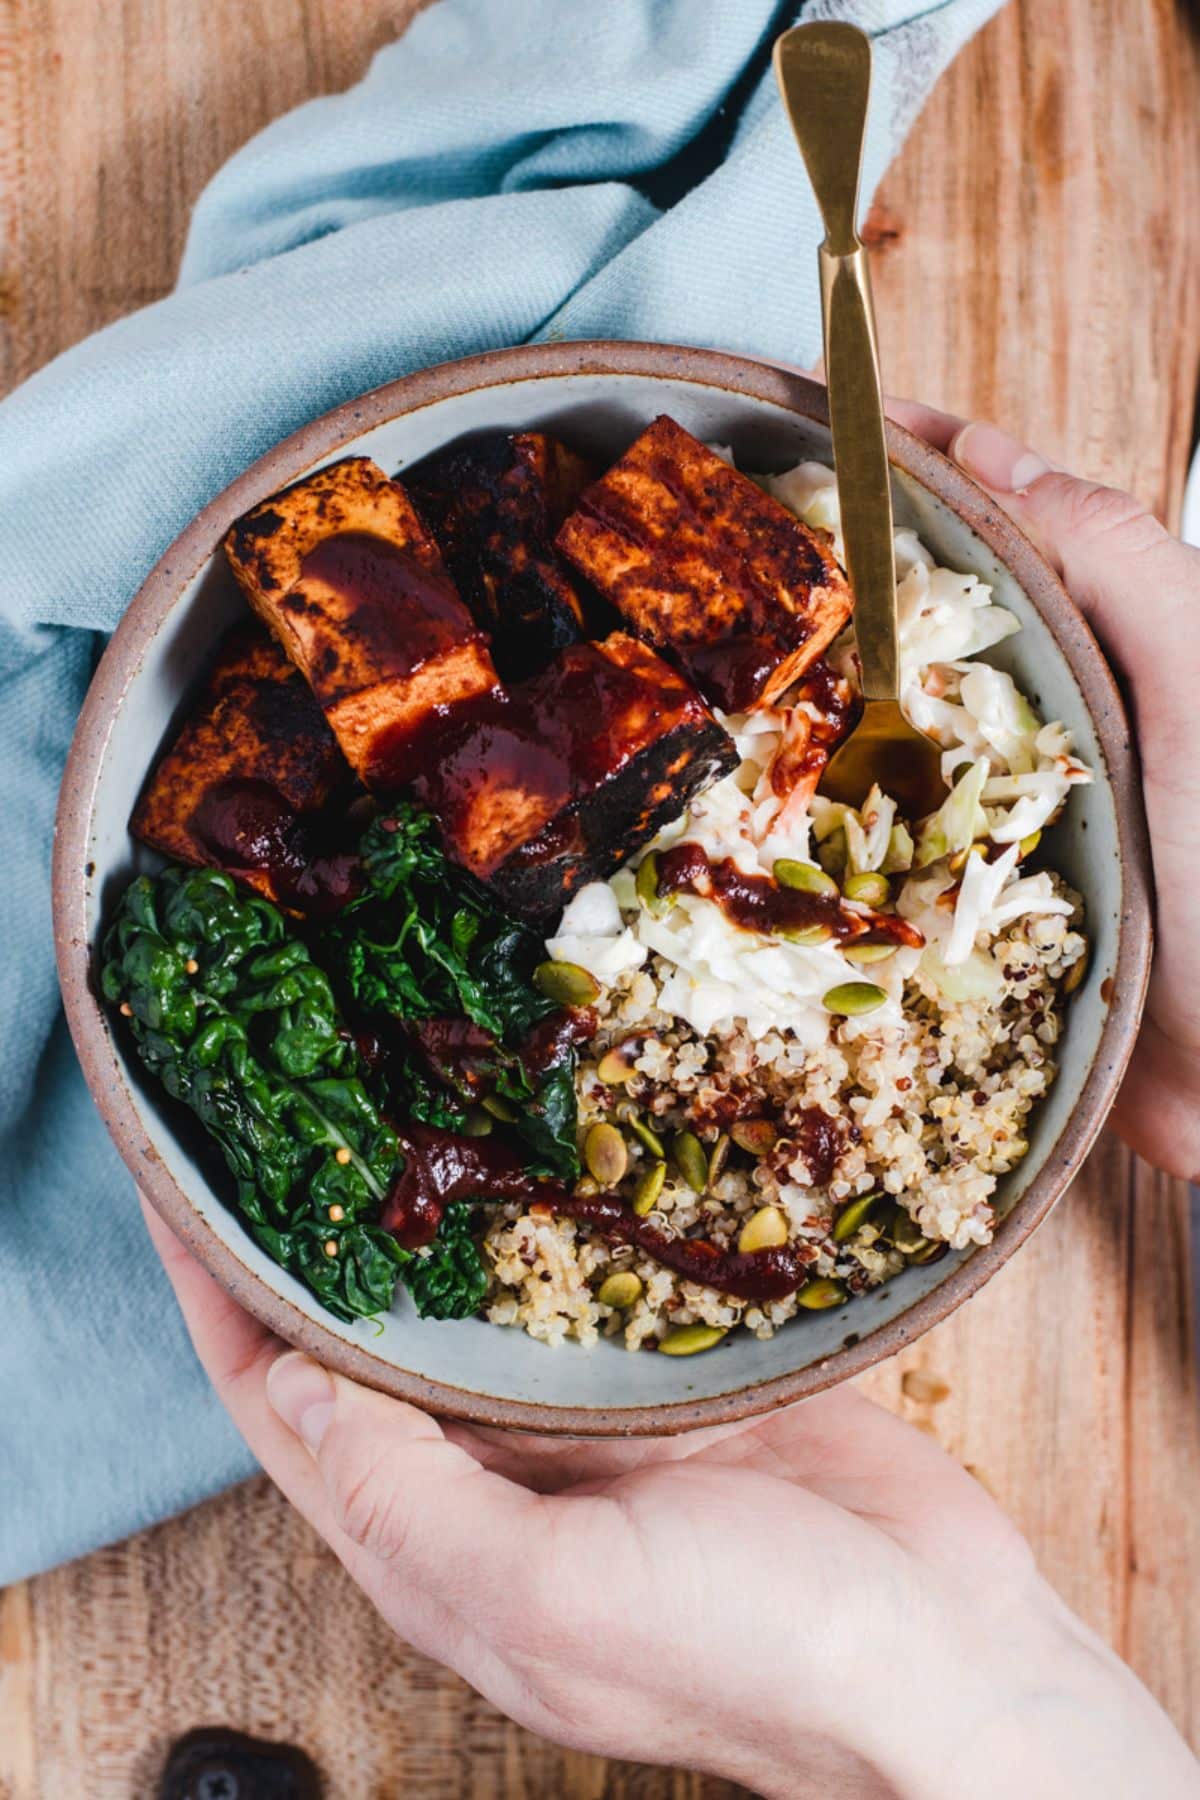 Hands wrapped around a blue bowl filled with tofu, kale, quinoa and coleslaw.